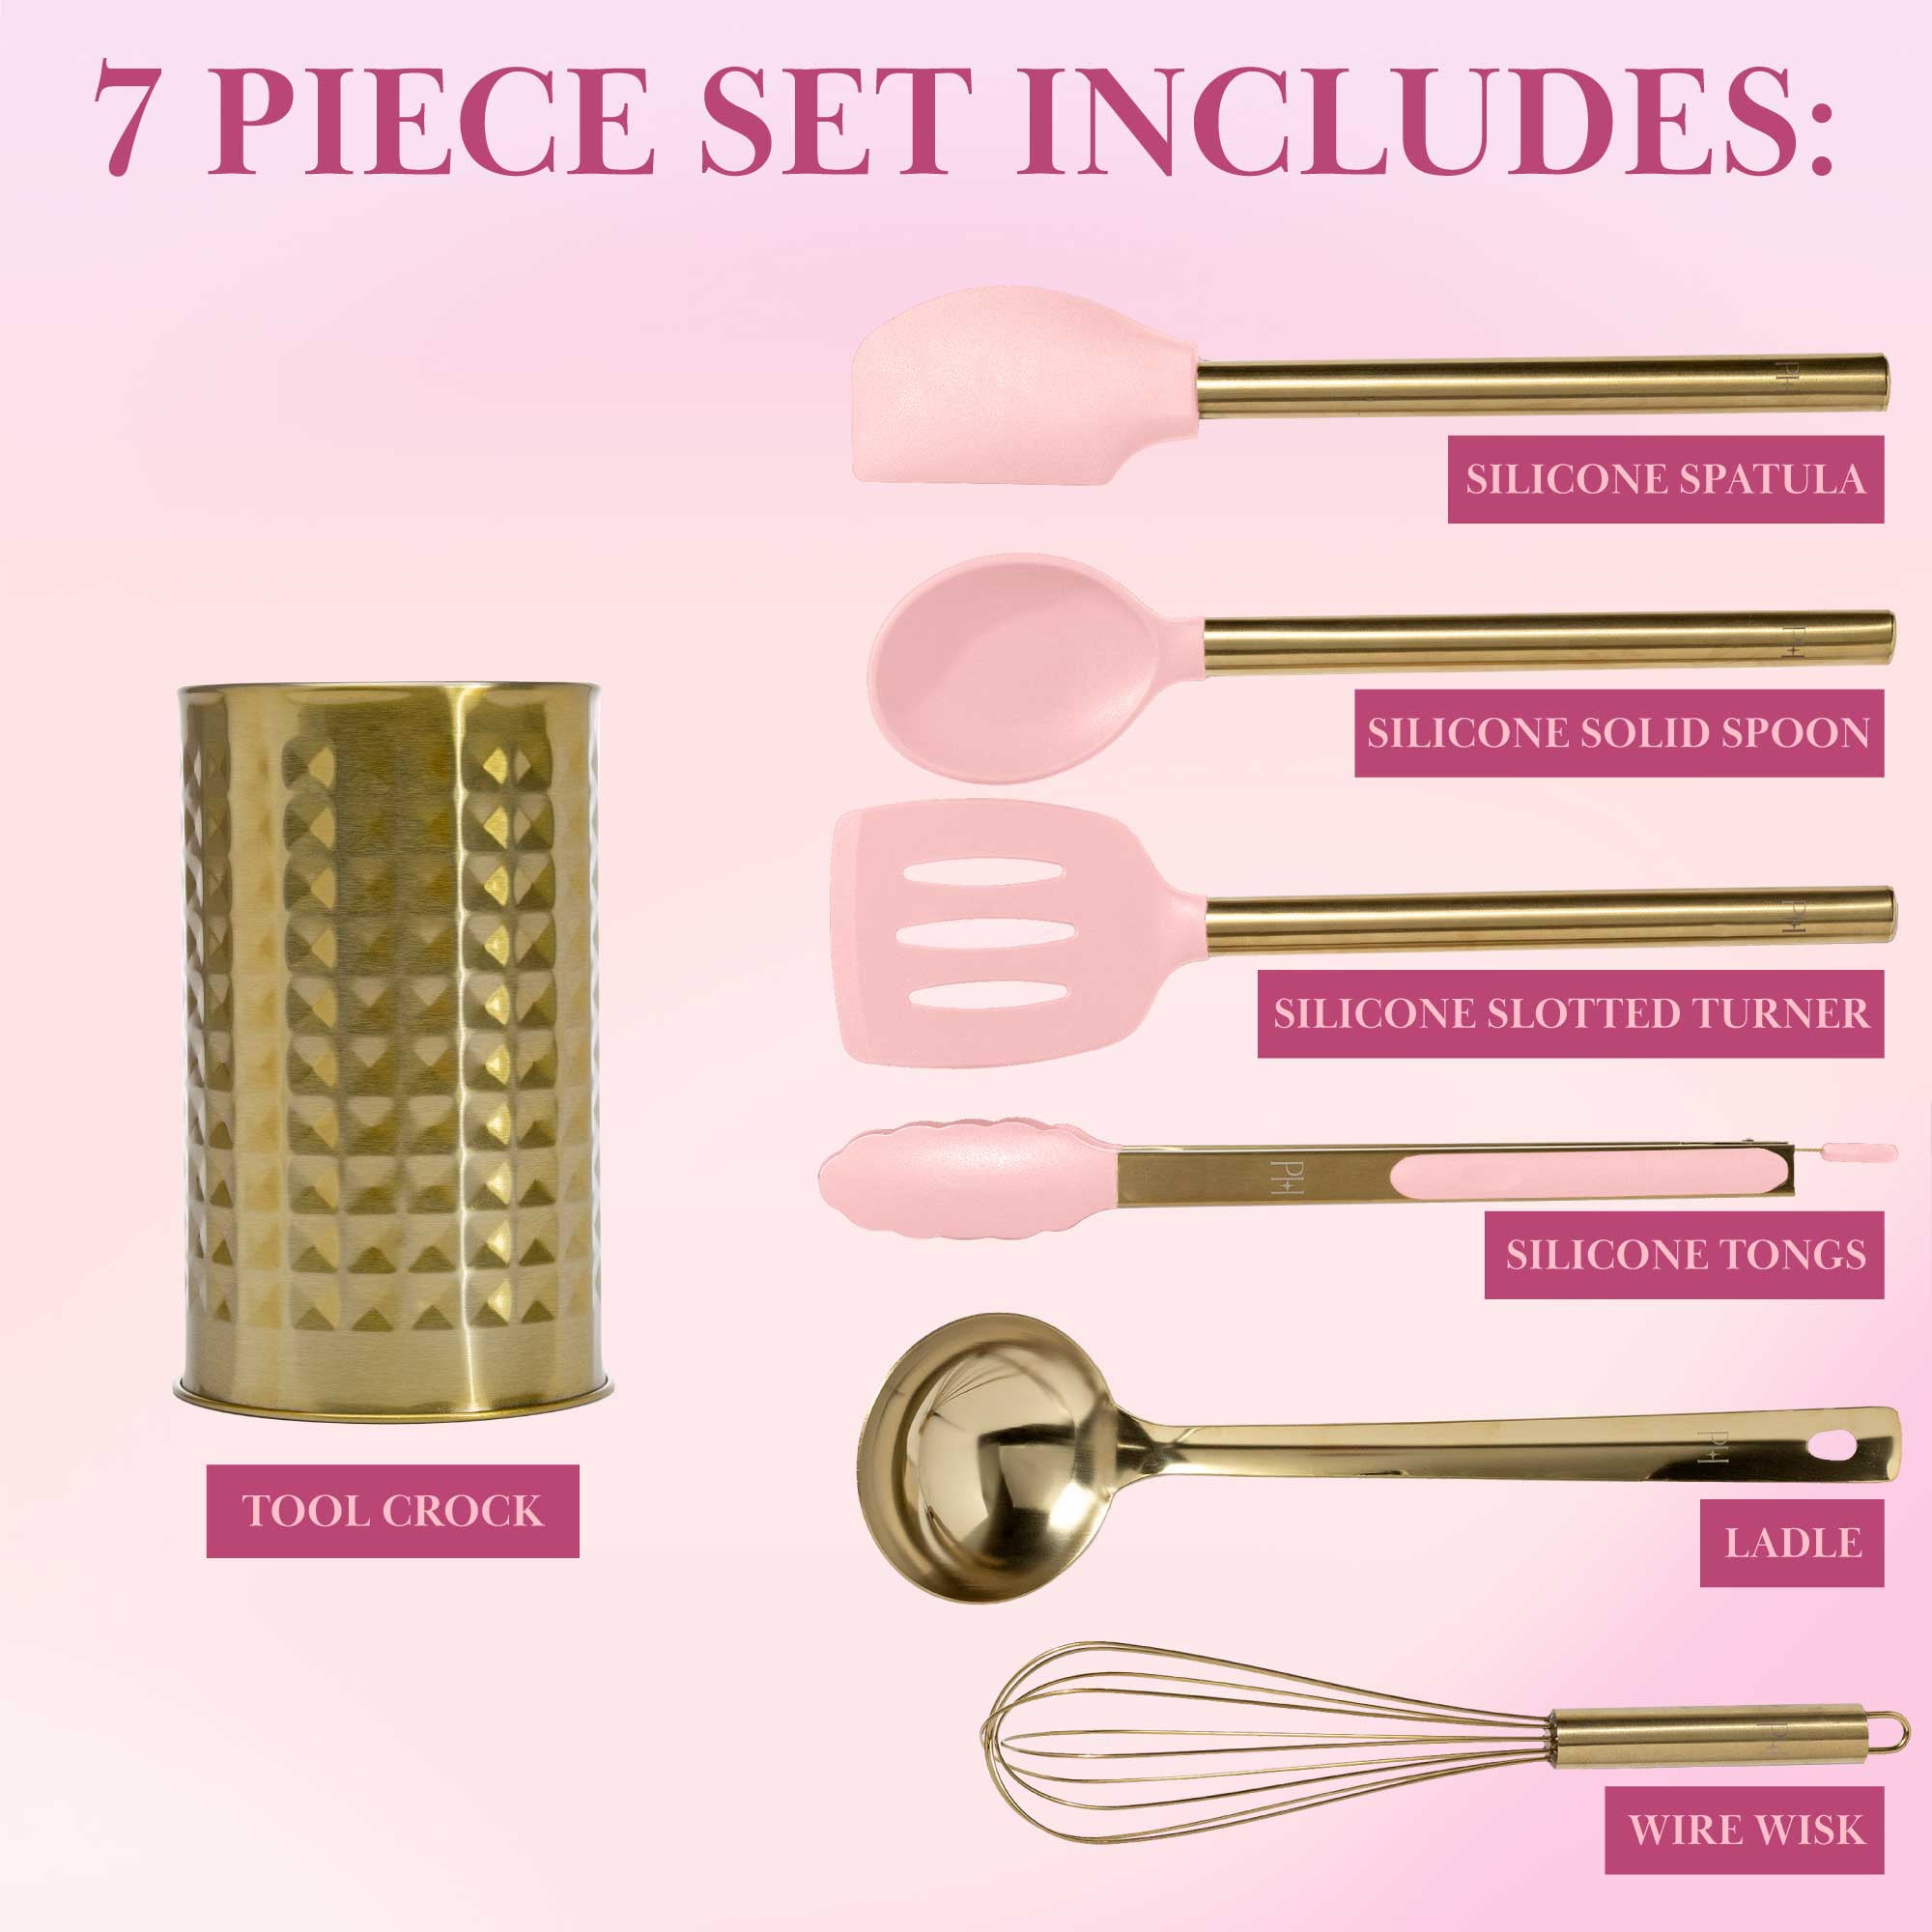 Paris Hilton 7-Piece Cooking Utensils Set, Silicone and Stainless Steel,  Pink 